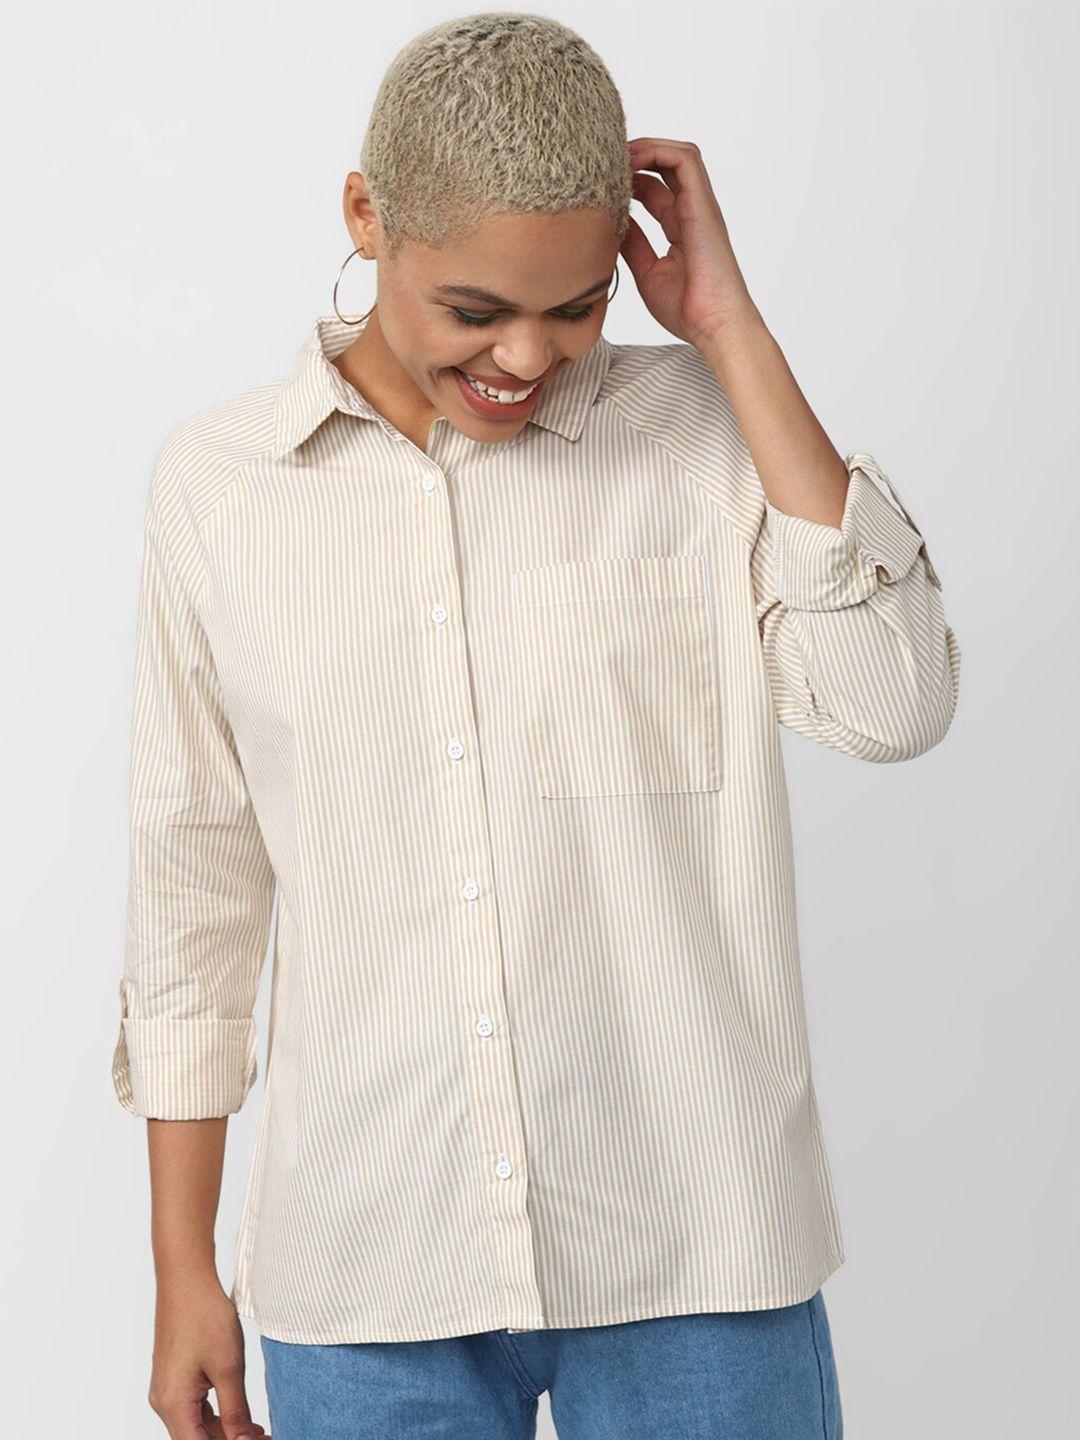 forever-21-striped-roll-up-sleeves-pure-cotton-shirt-style-top